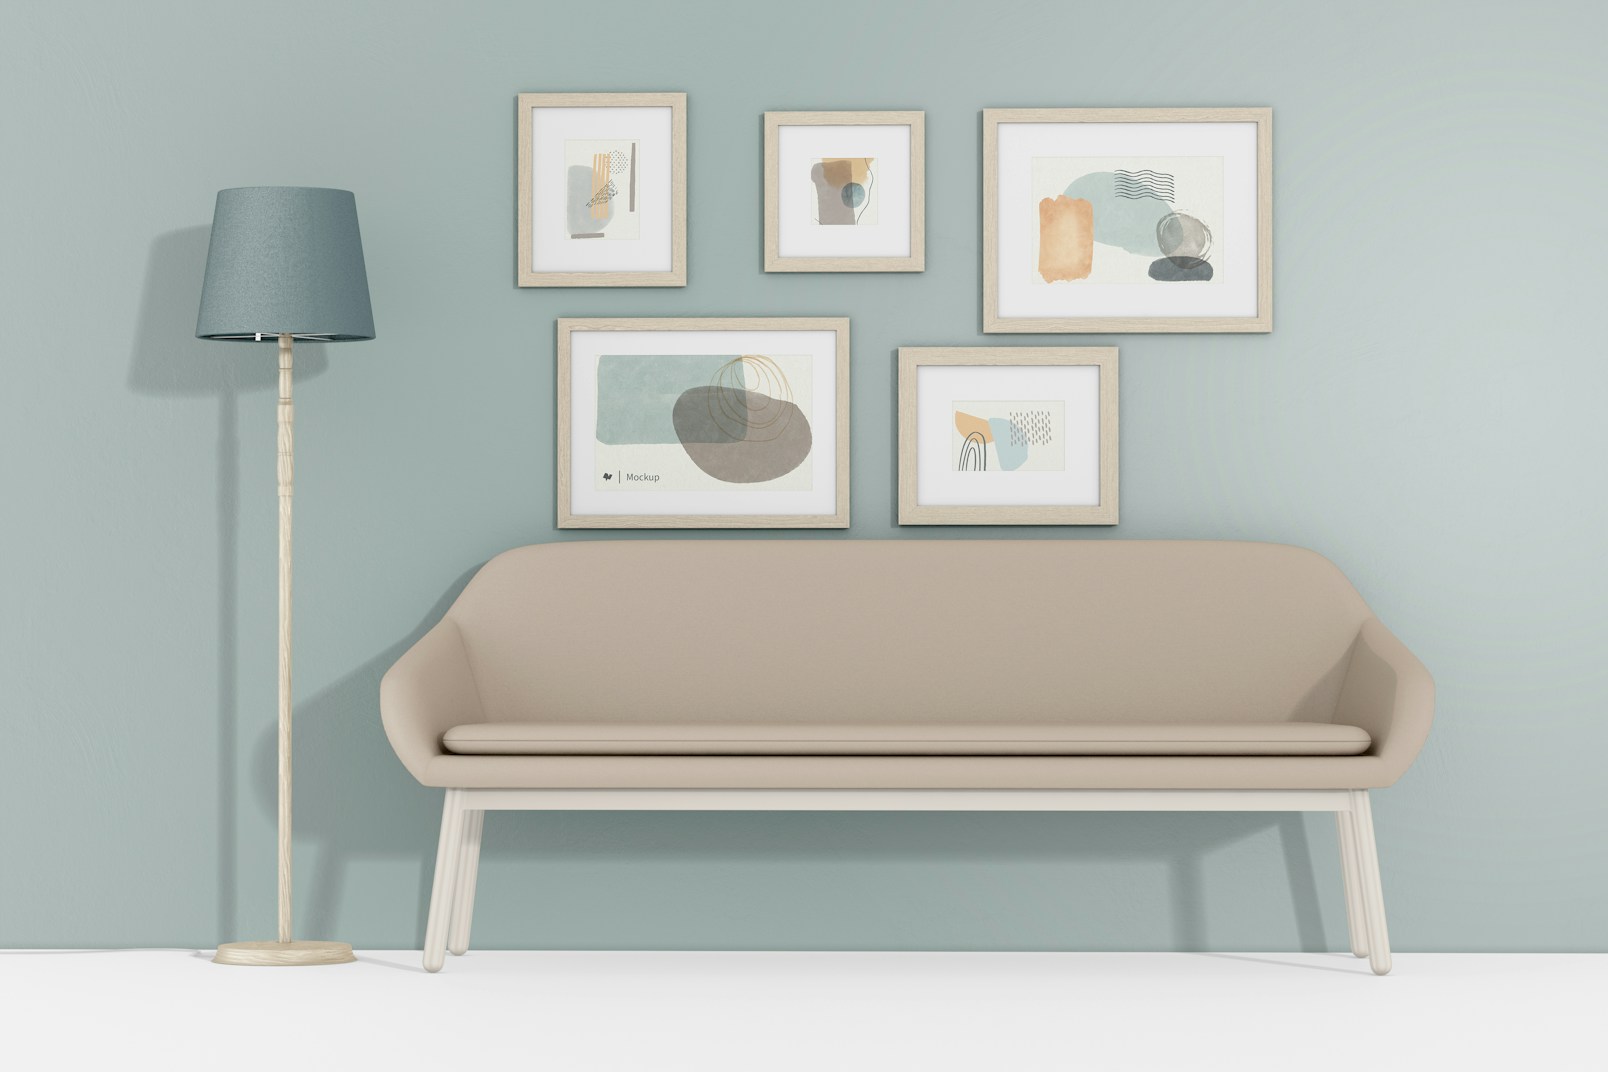 5 Gallery Frames with Sofa Mockup